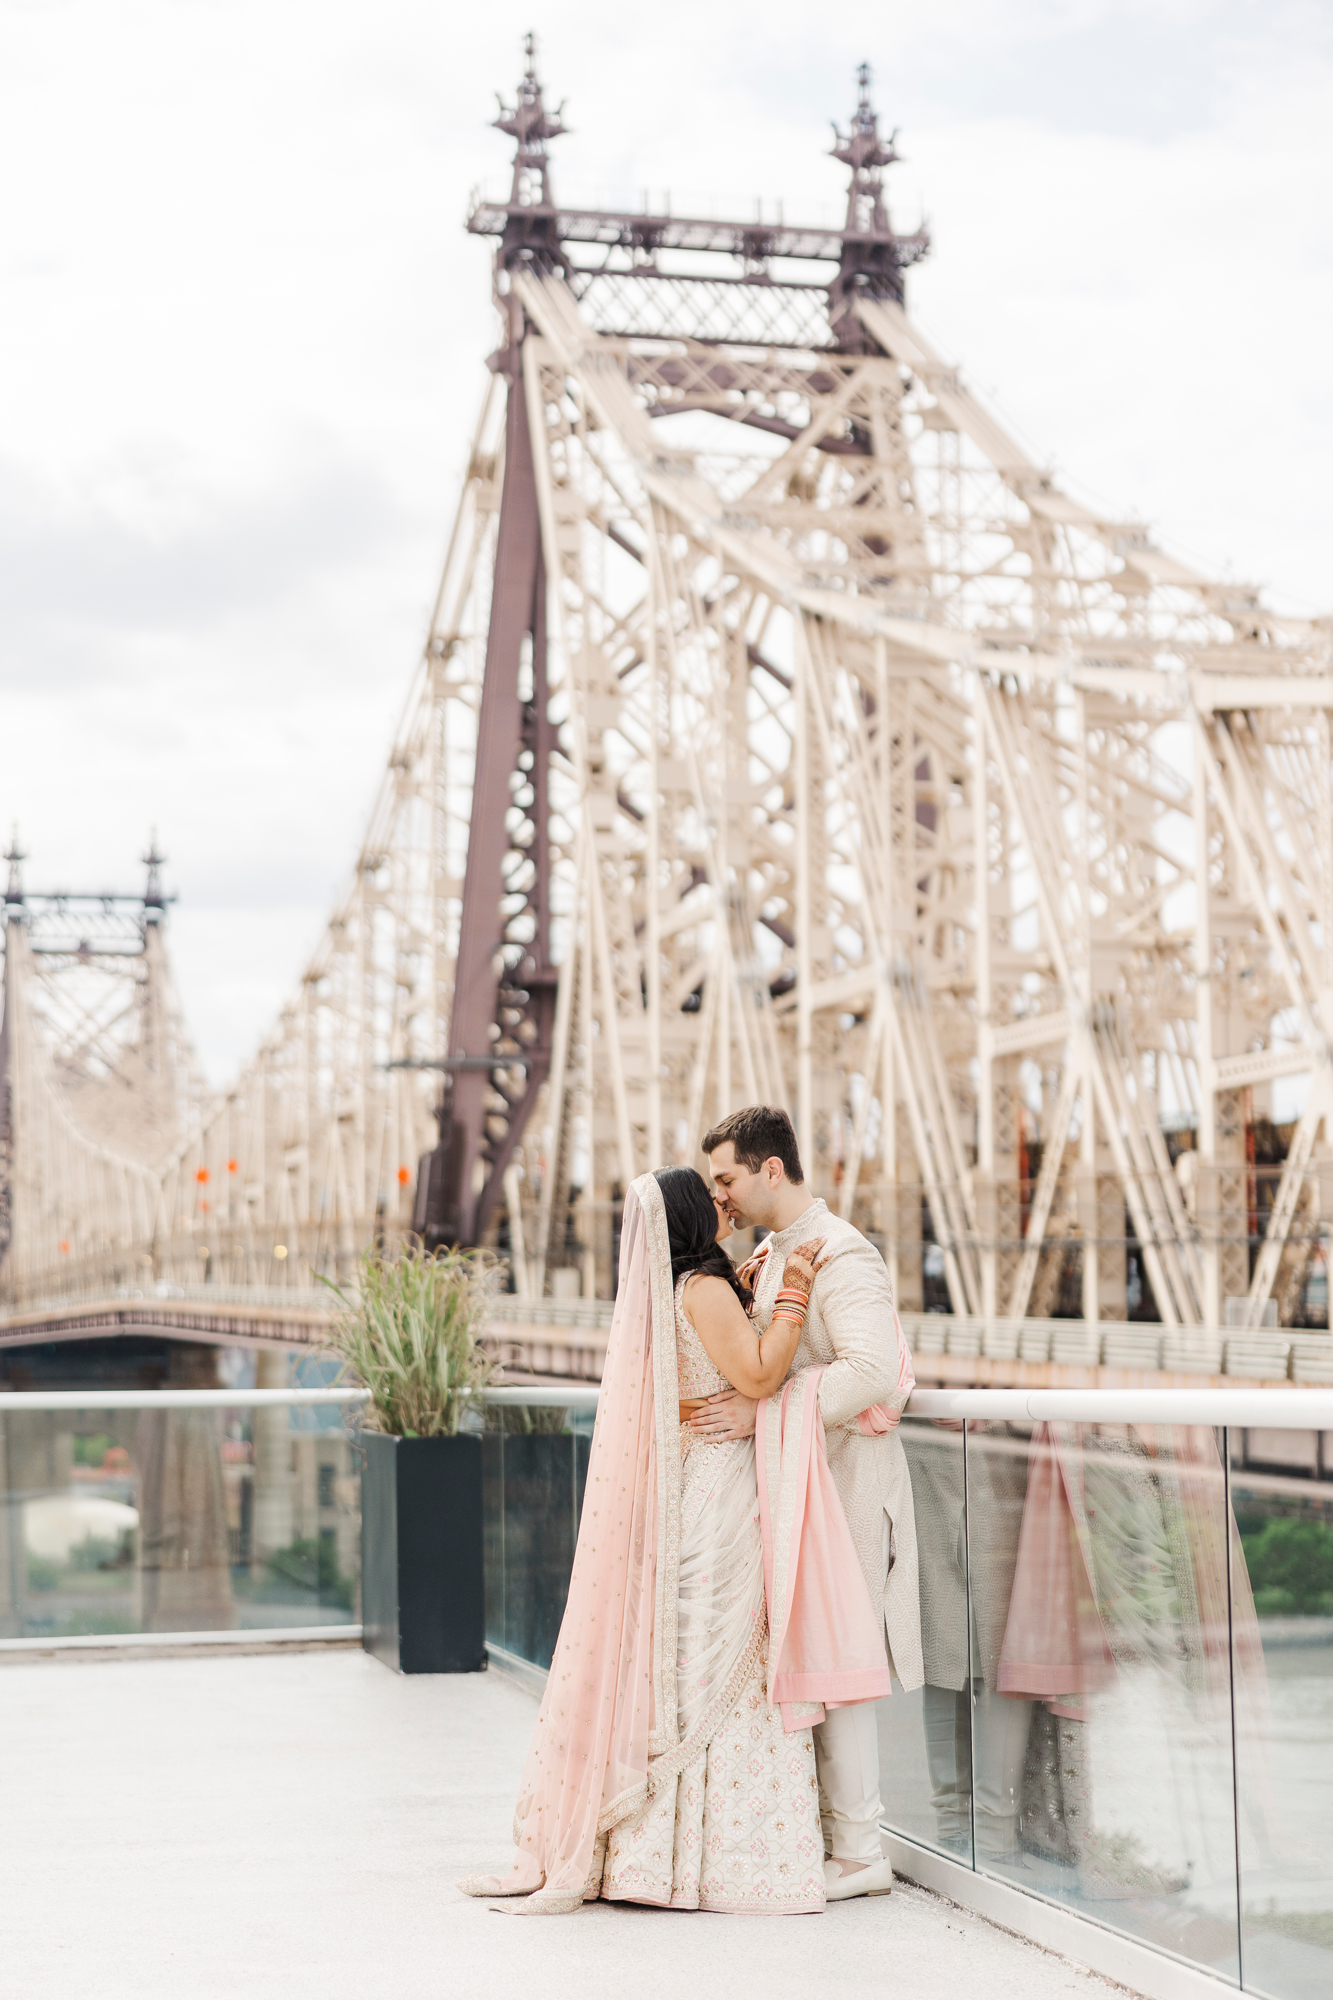 Natural Ravel Hotel Wedding in a Peachy, Pastel Palette